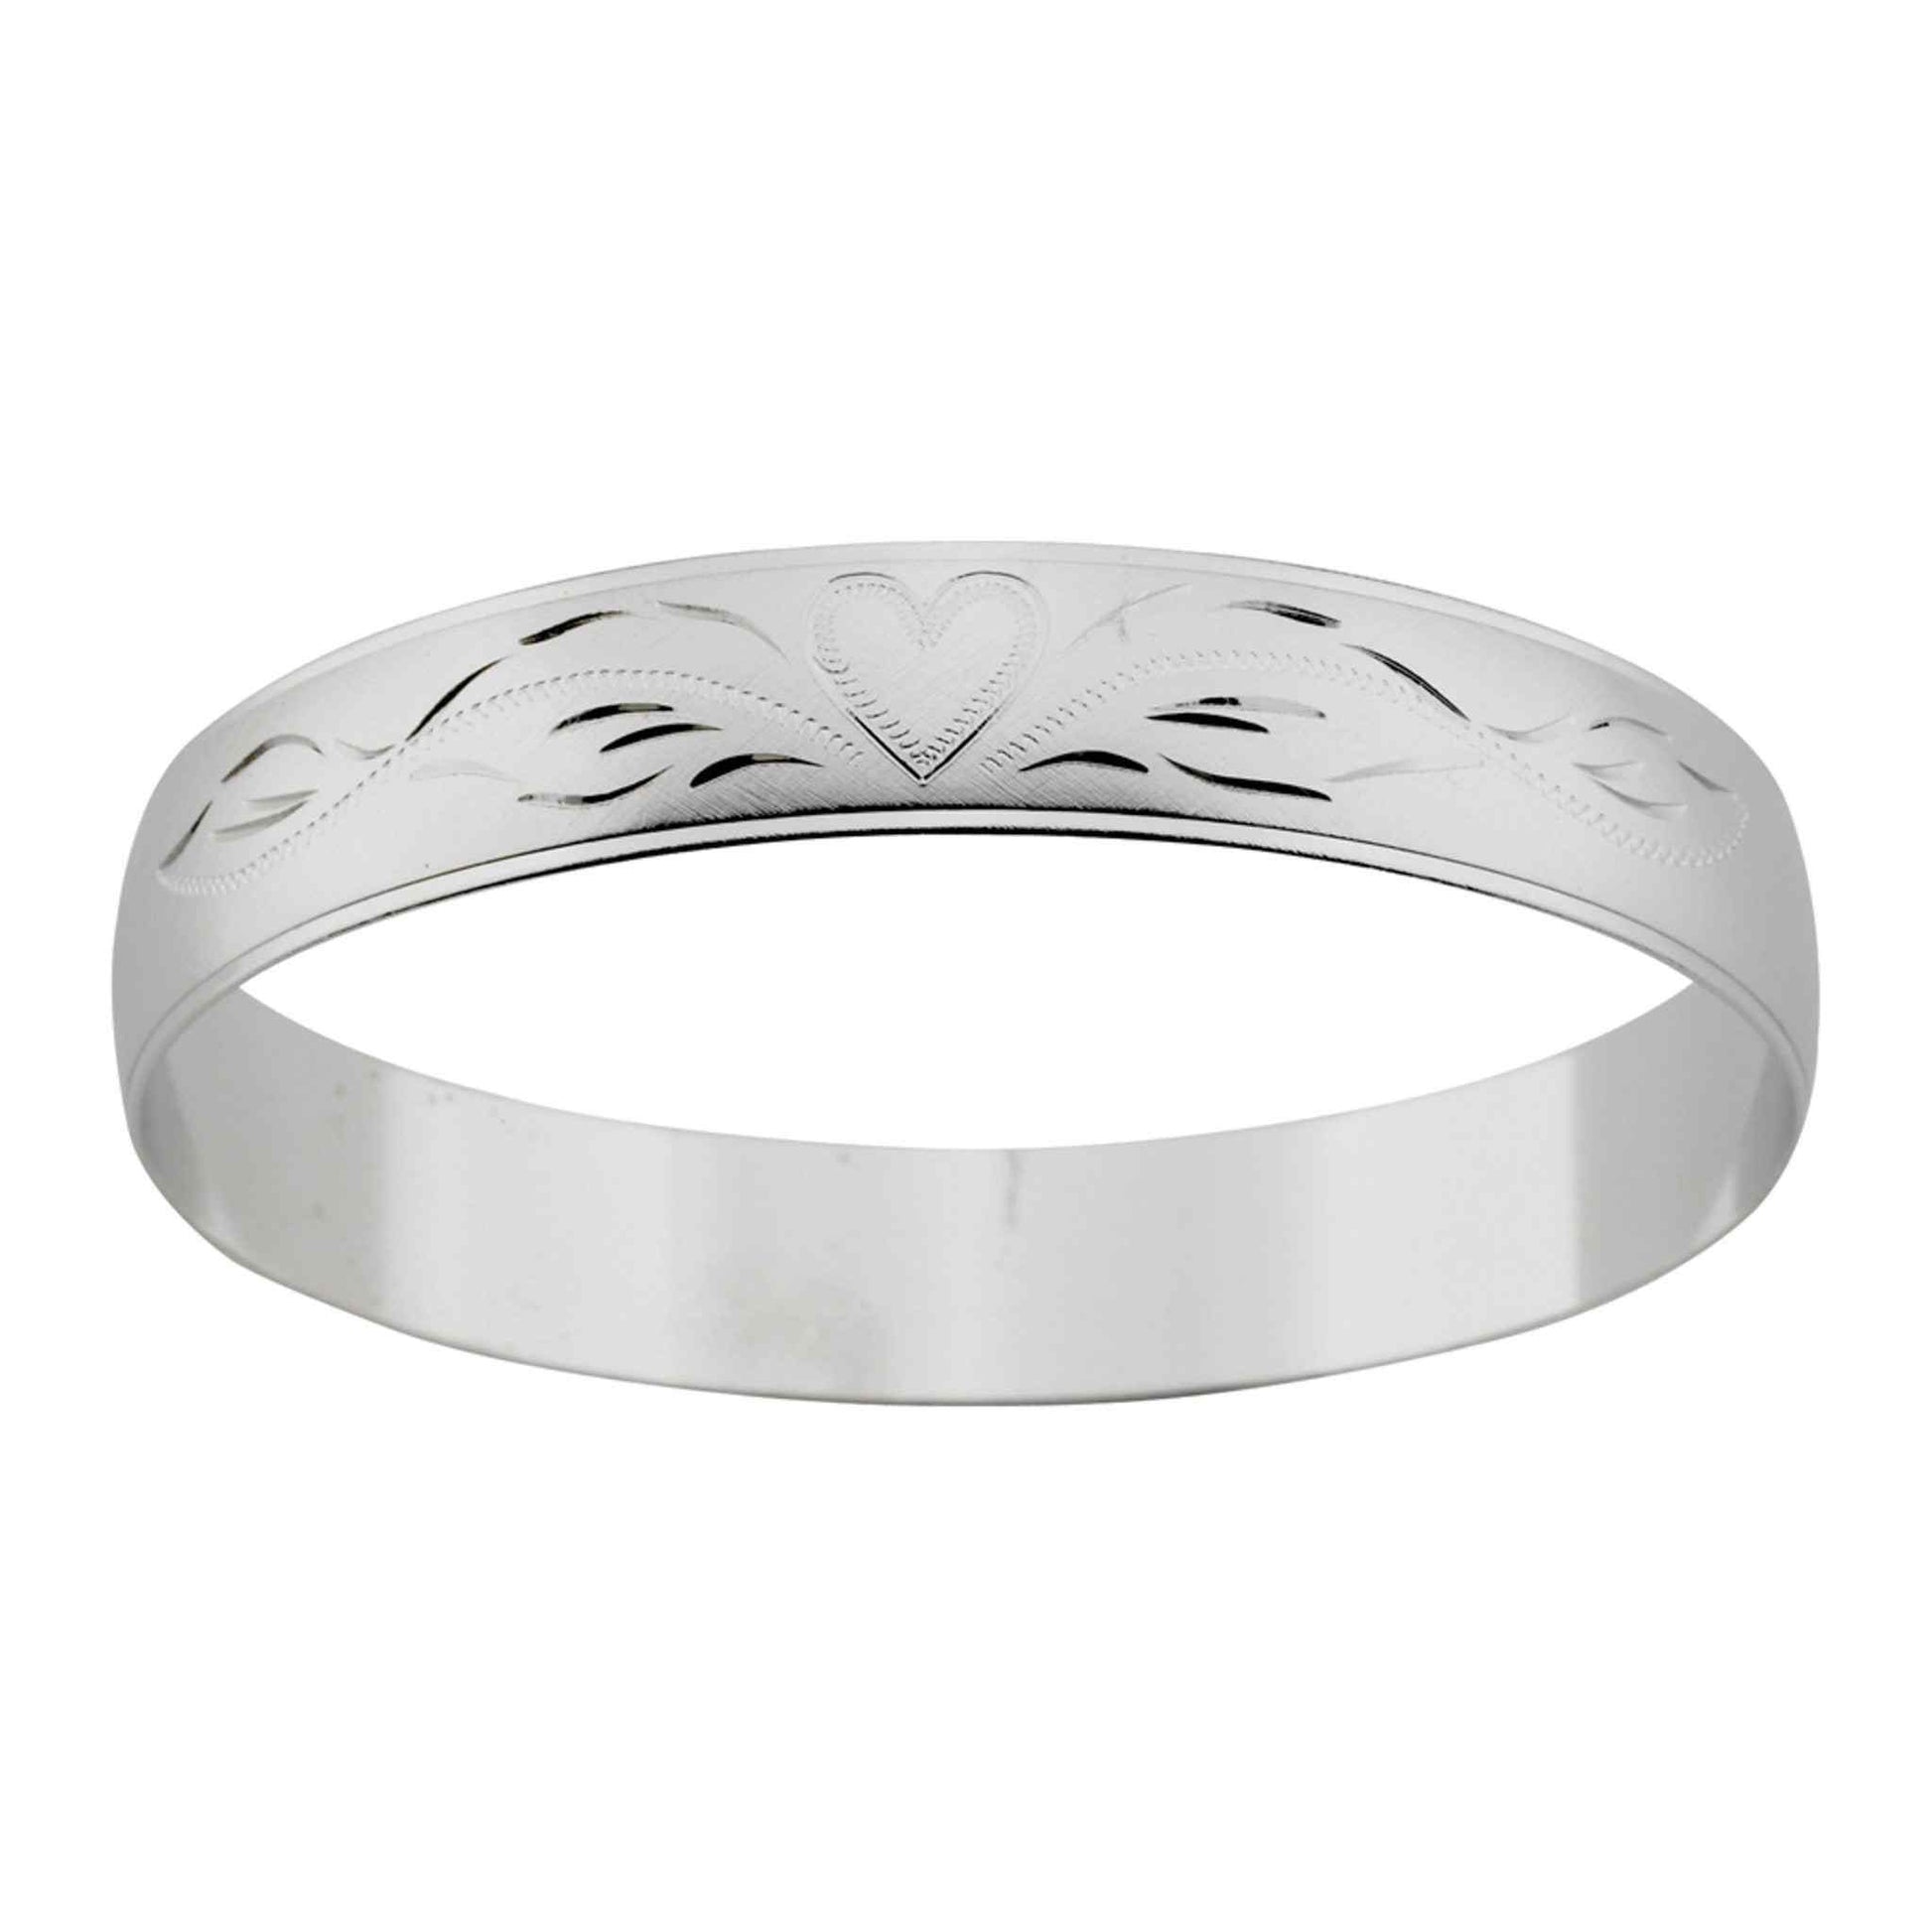 A 1/2" bangle bracelet with hand engraving displayed on a neutral white background.